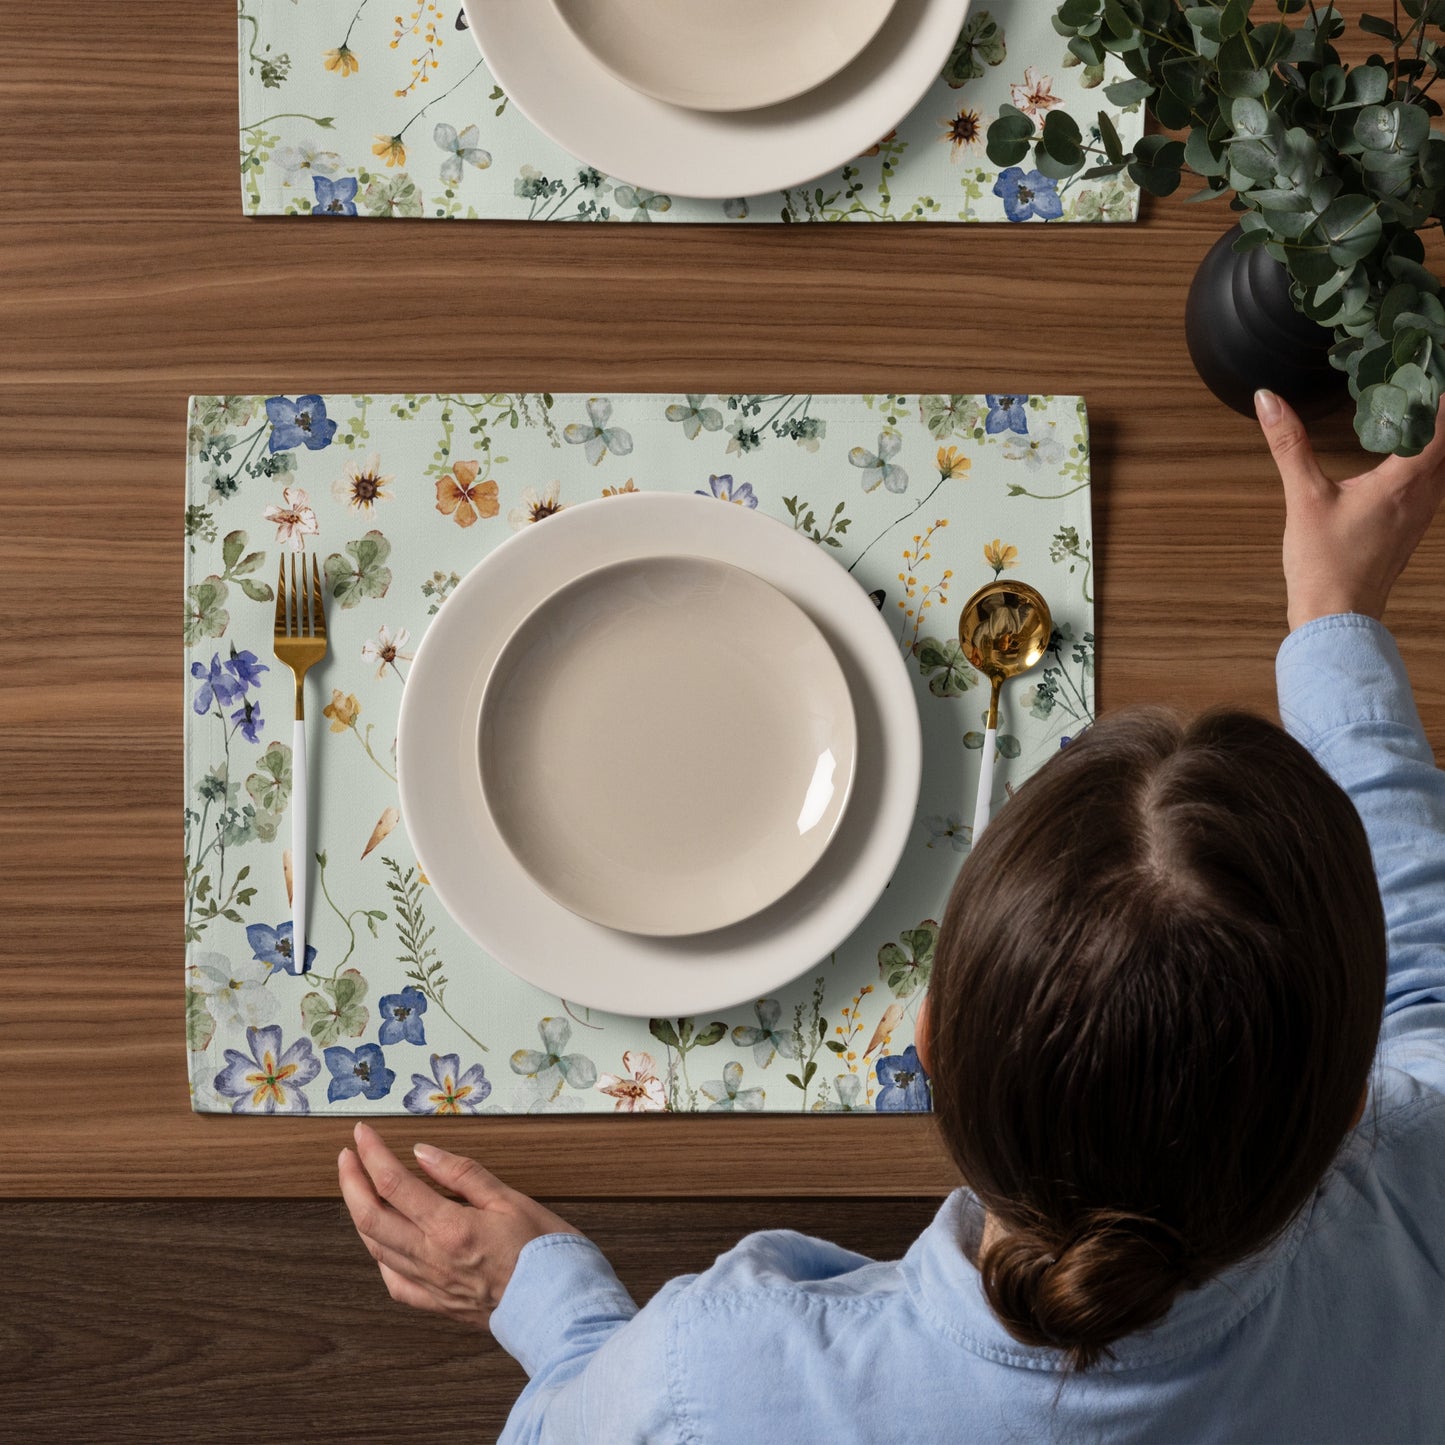 woman arrange table settings with flower placemats and plates